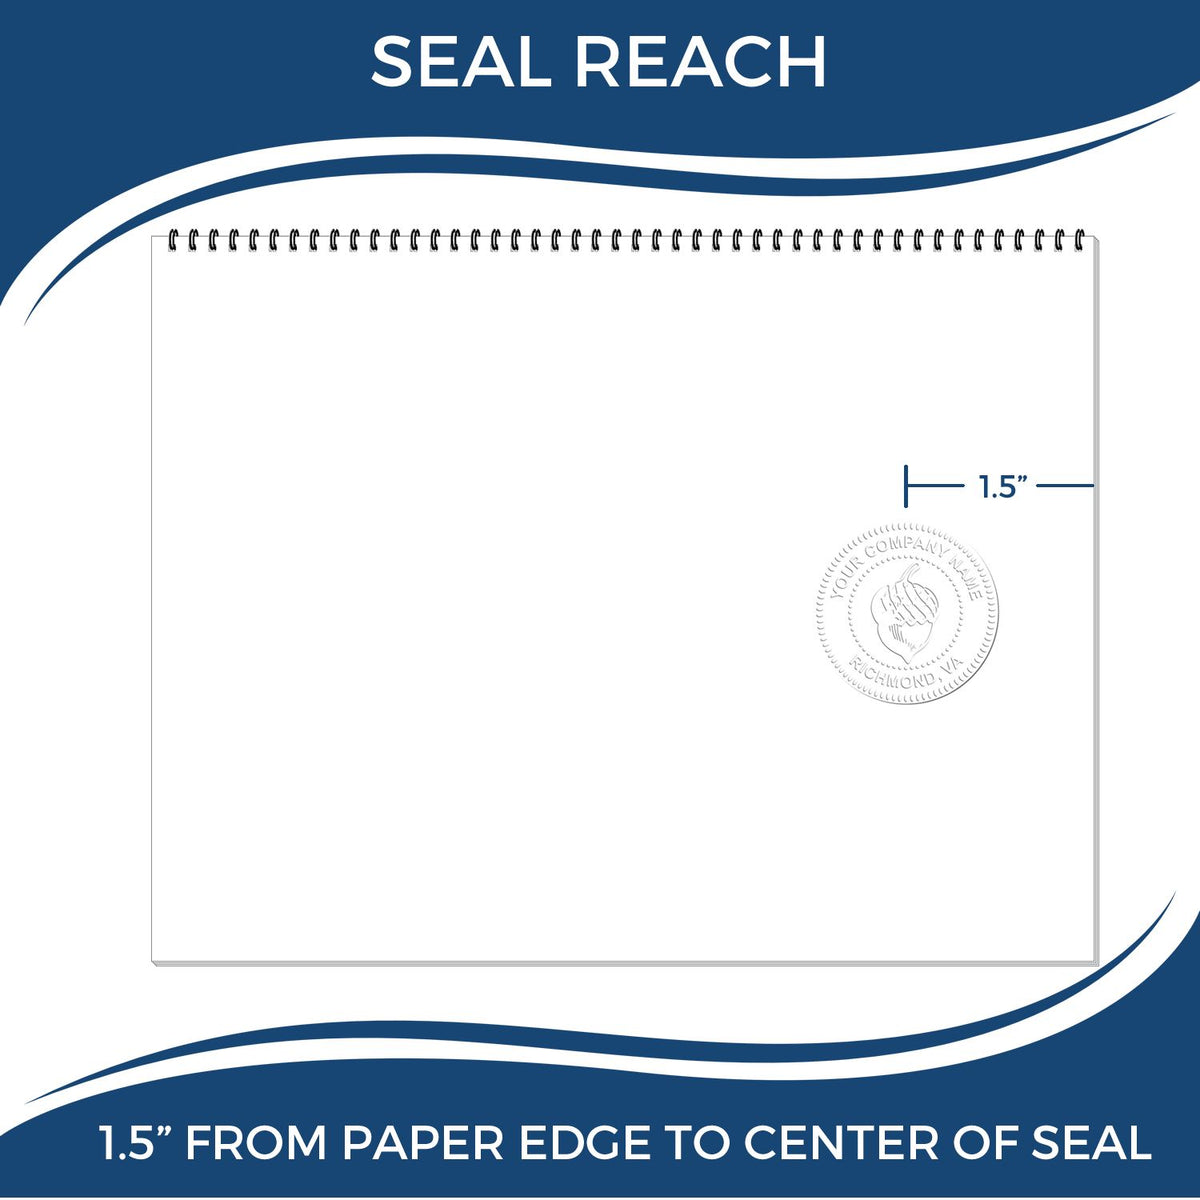 An infographic showing the seal reach which is represented by a ruler and a miniature seal image of the Handheld Nevada Architect Seal Embosser